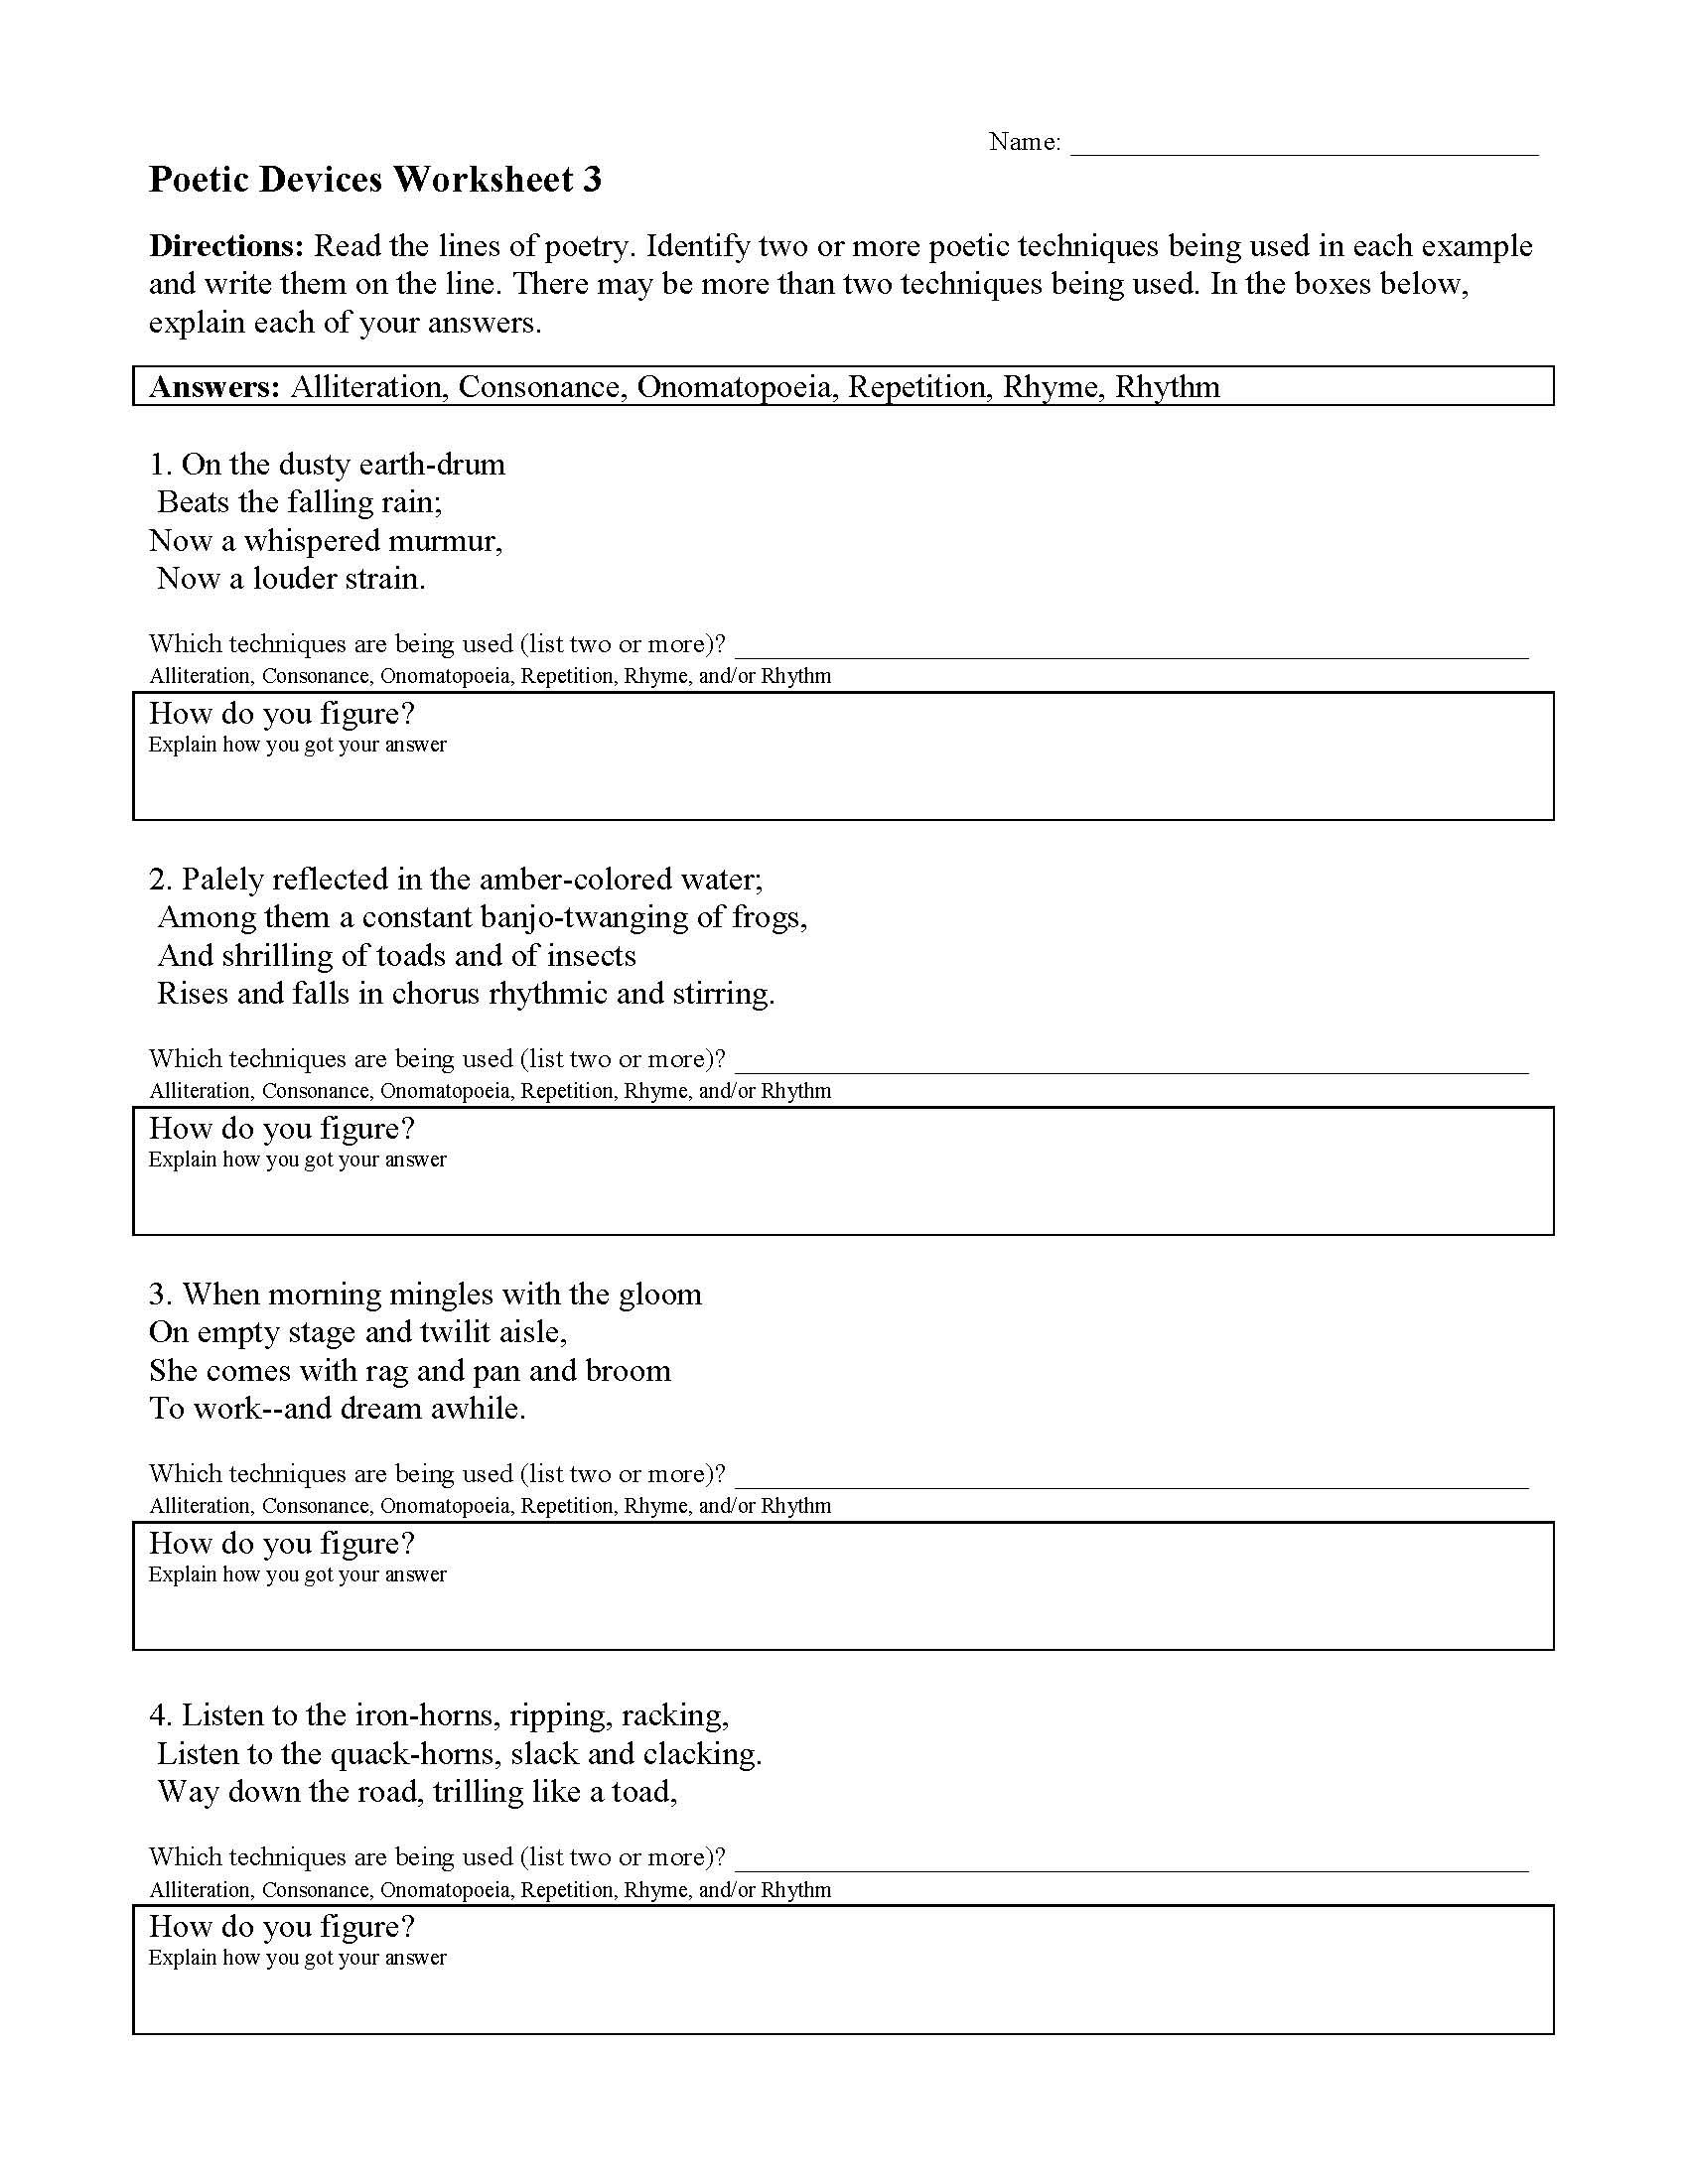 This Is A Preview Image Of The Poetic Devices Worksheet 3 Language 